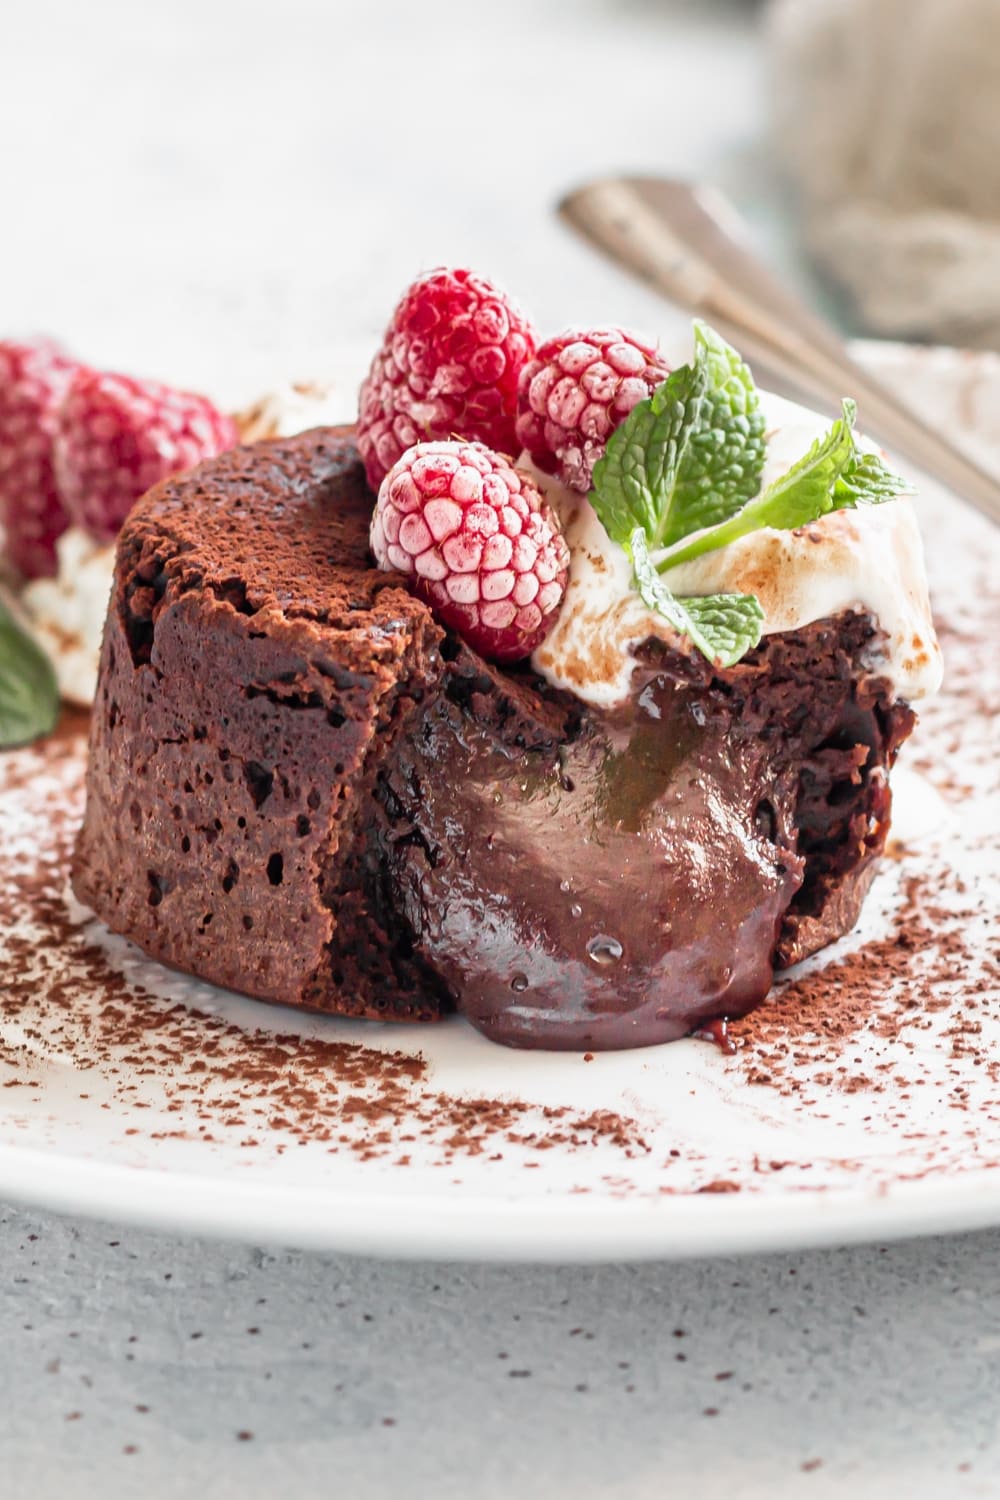 Self-Saucing Pudding Recipes featuring Homemade Chocolate Molten Cake with Raspberries and Mint